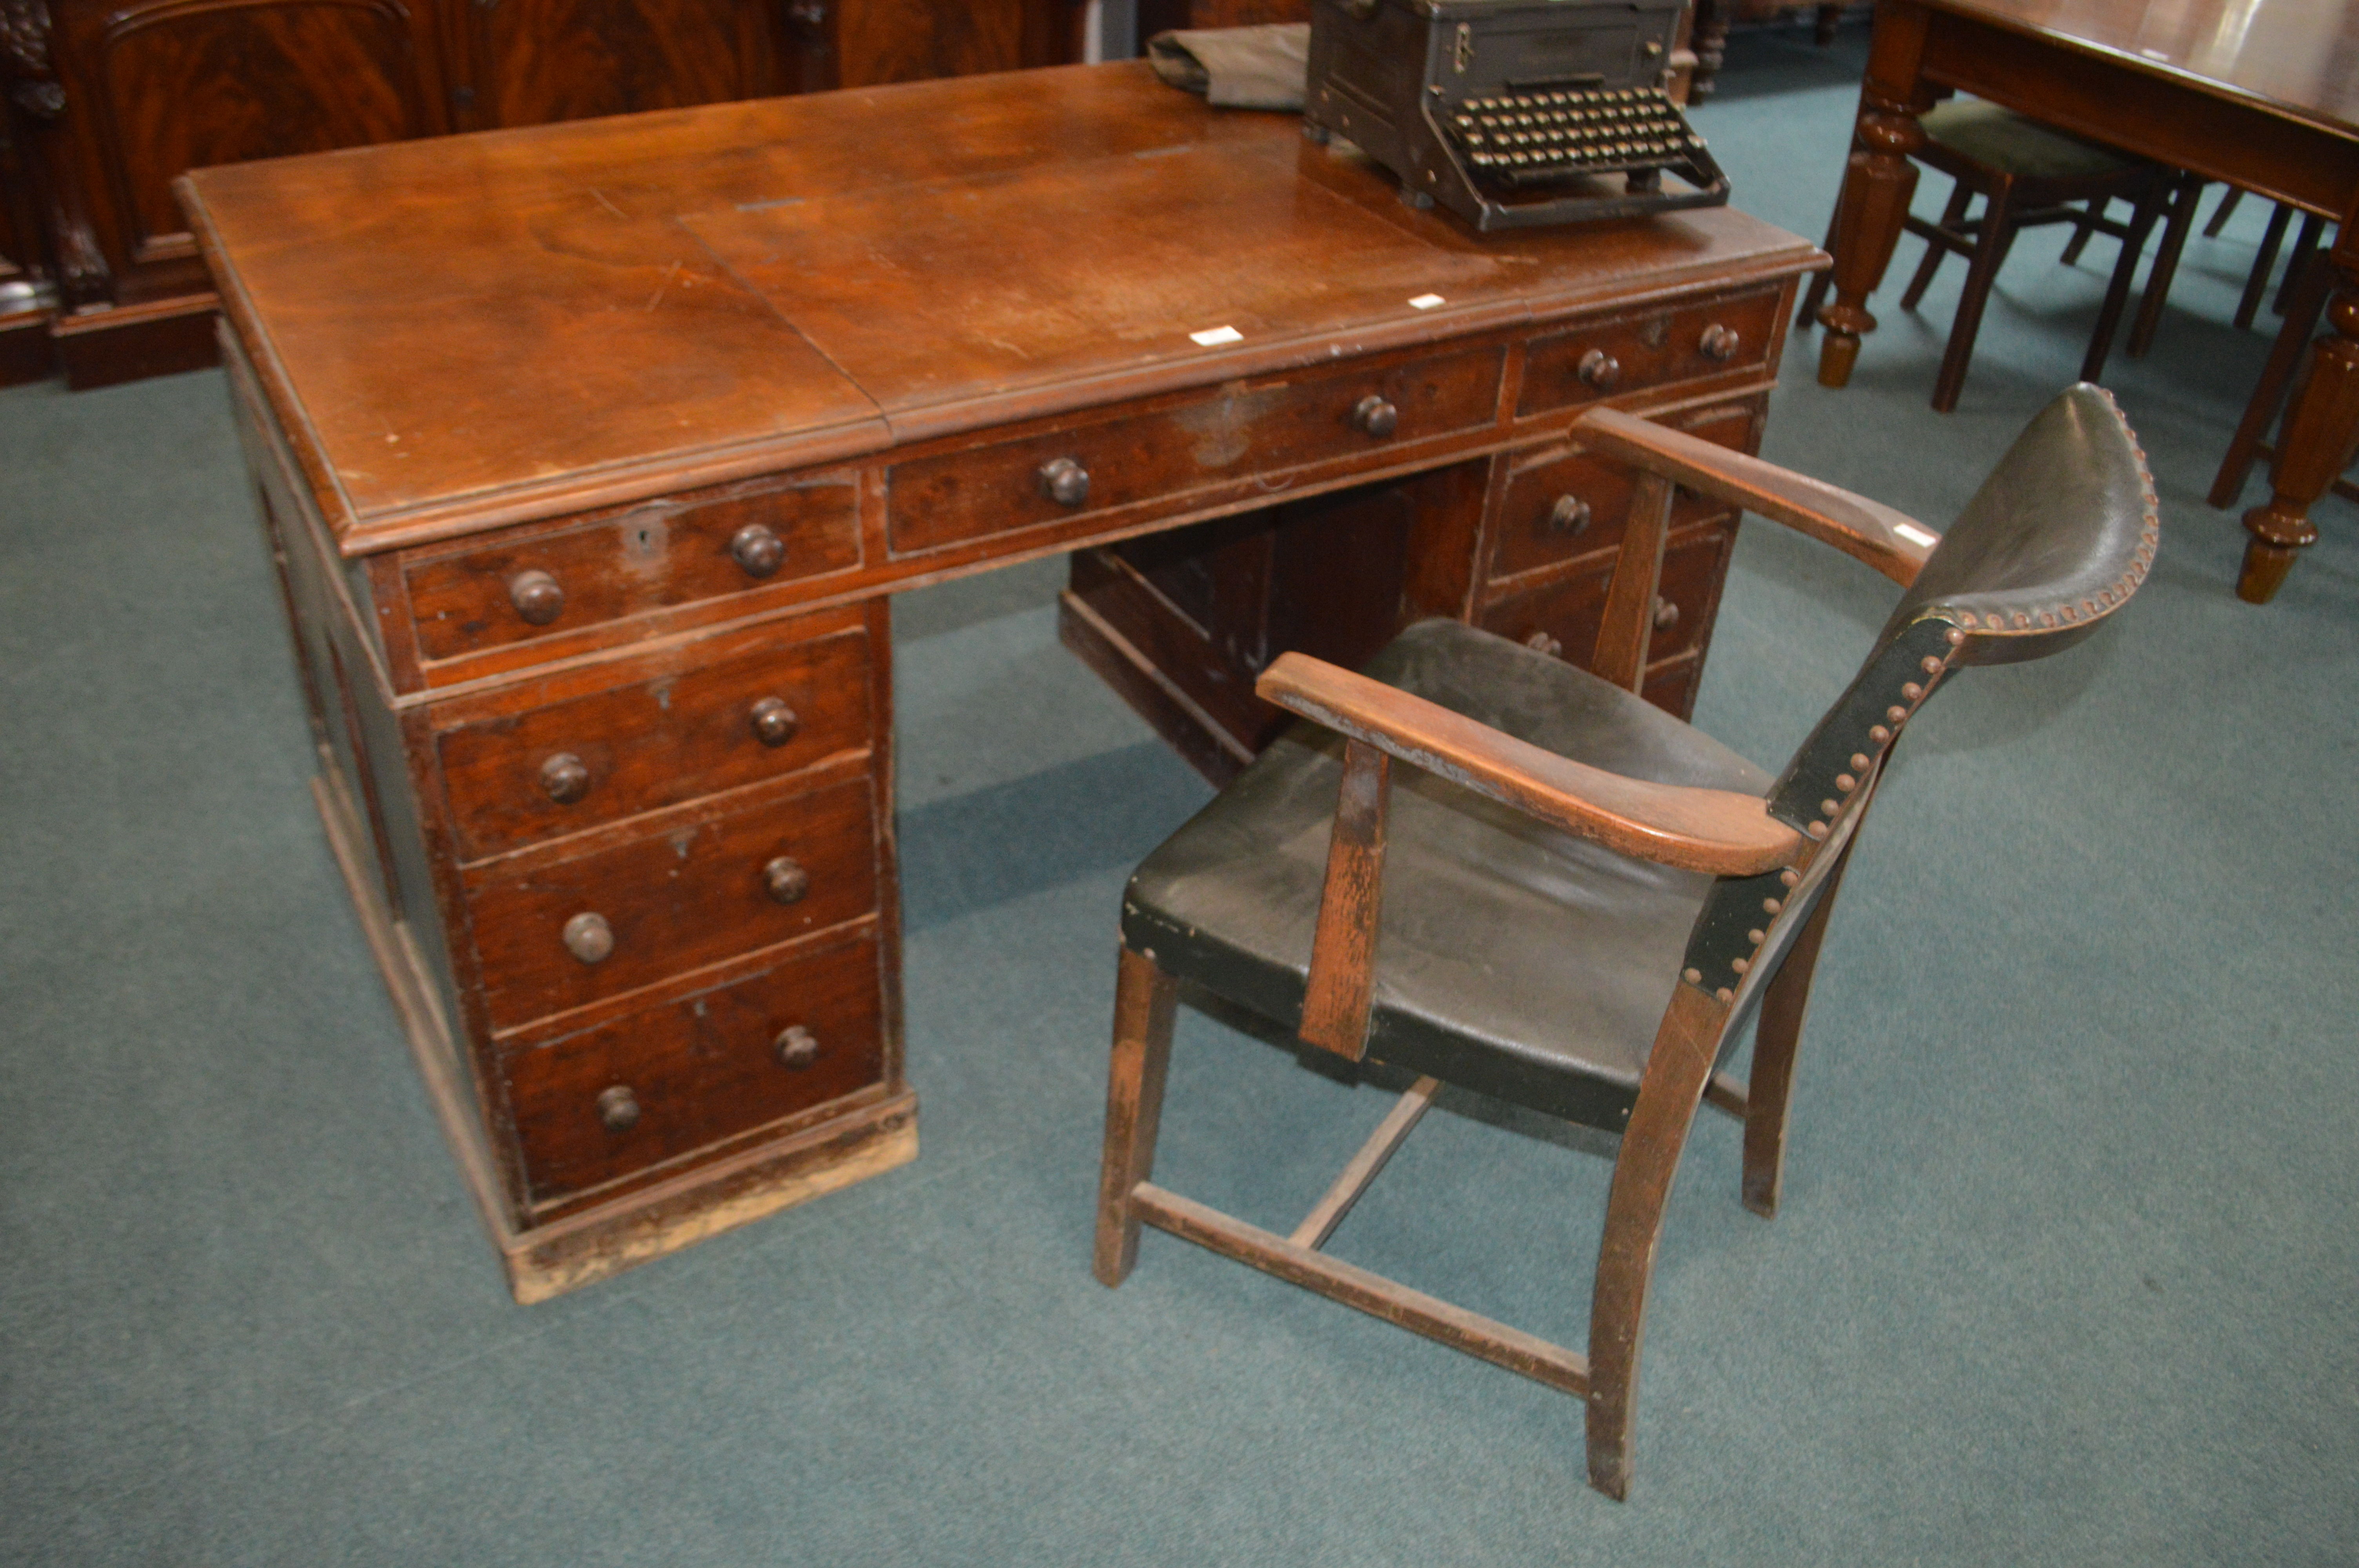 Mahogany Desk with Central Demi Drawer Compartment - Image 3 of 4